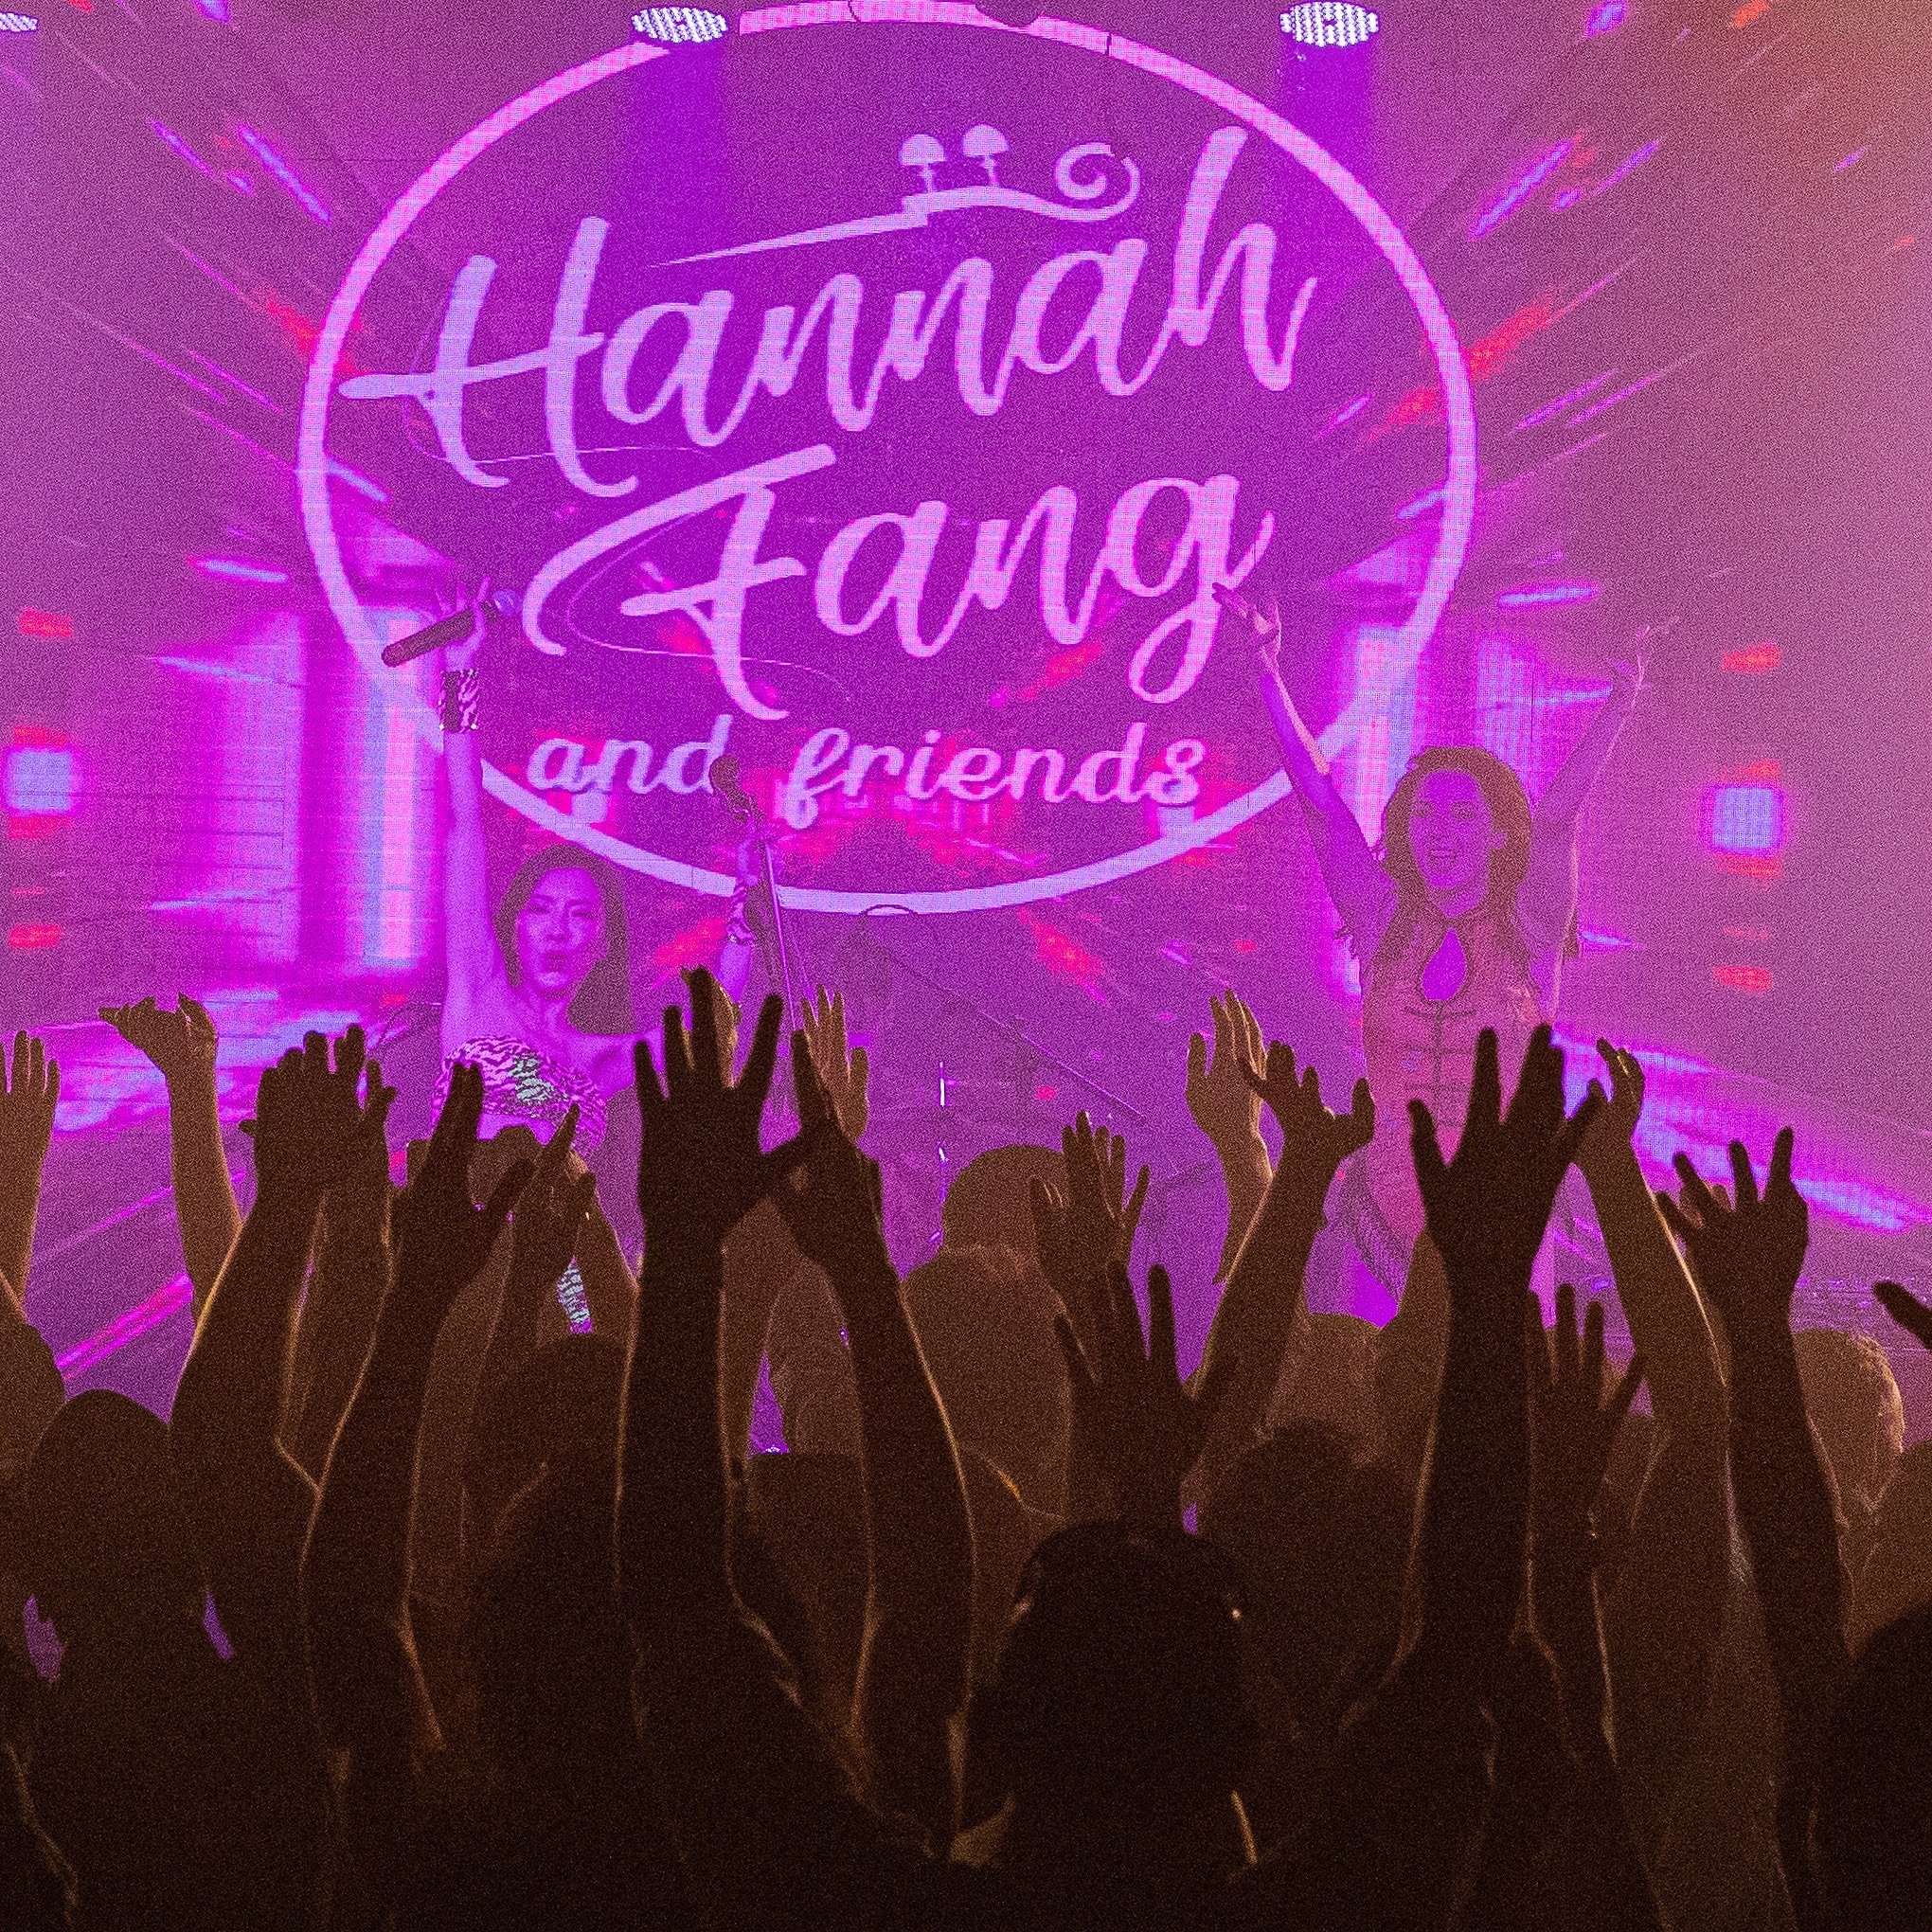 Let&rsquo;s vibe together! From classical to EDM, with a touch of drum and bass. 💃🏻

#edm #event #dj #hannahfang #string